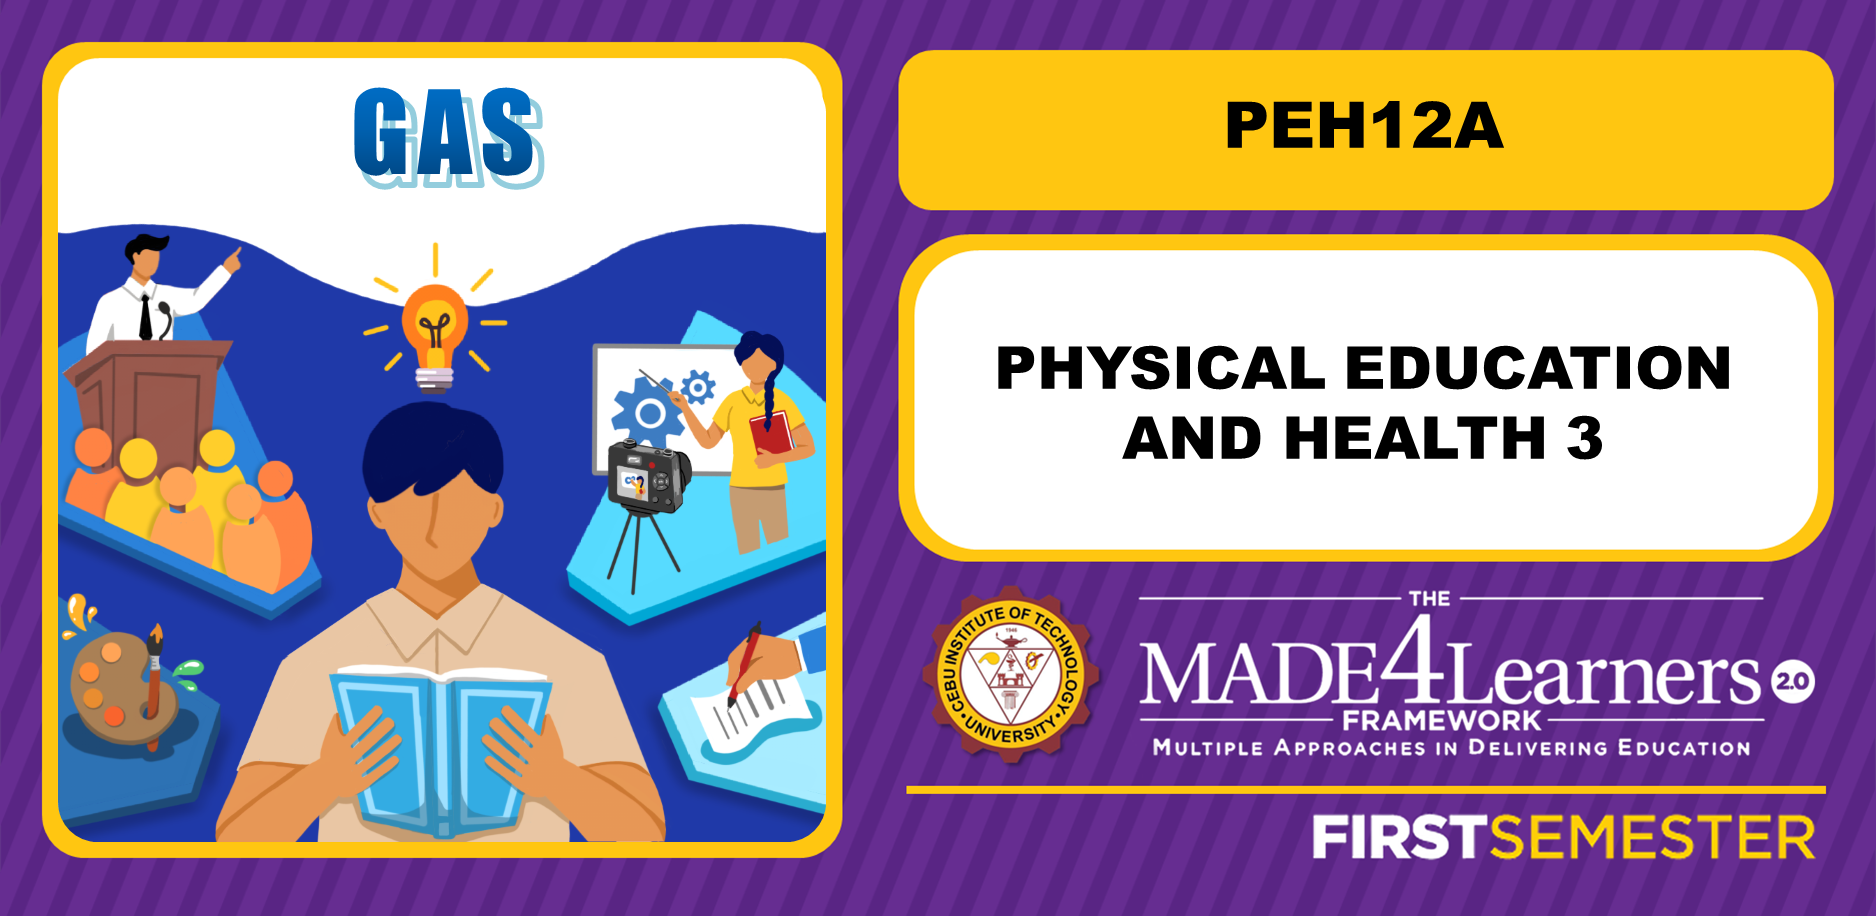 PEH12A: Physical Education and Health 3 (GAS)